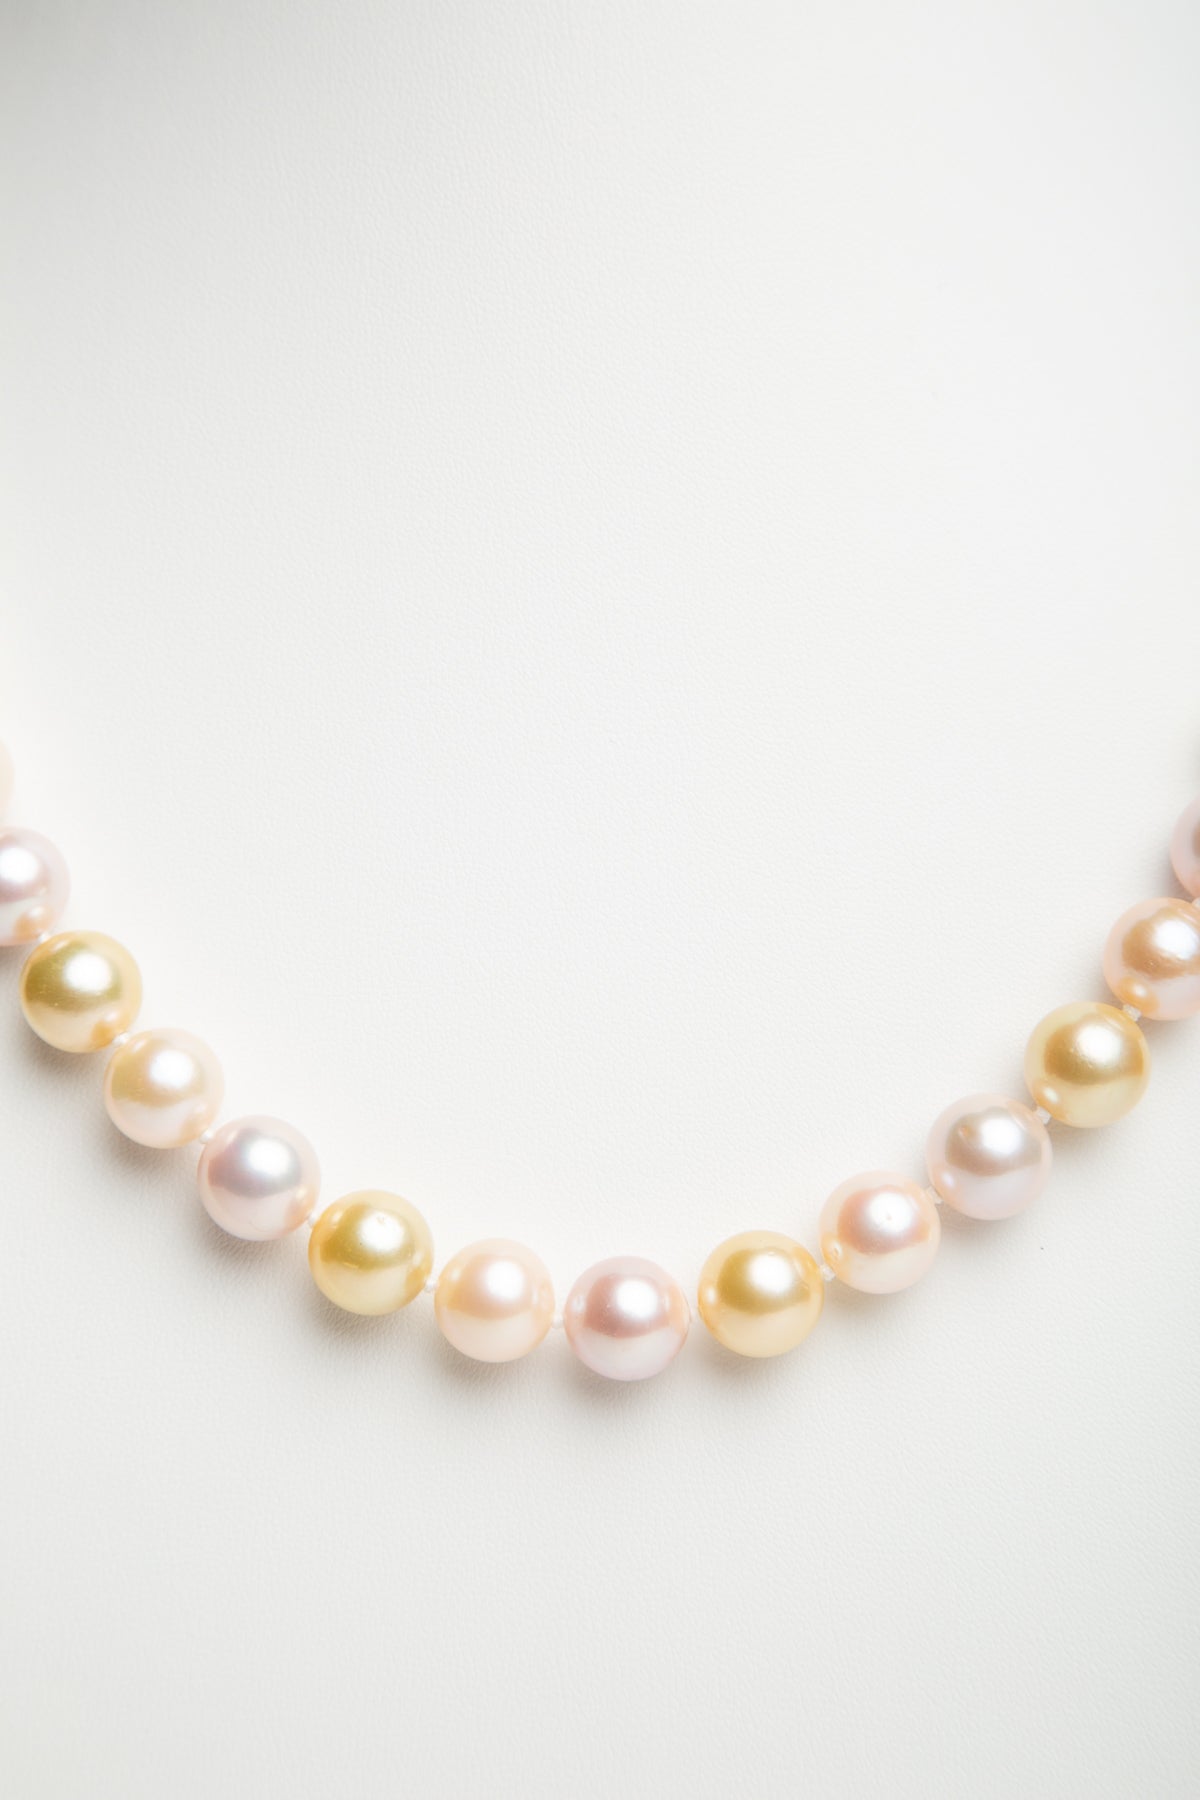 MAXFIELD PRIVATE COLLECTION | PINK PEARL NECKLACE